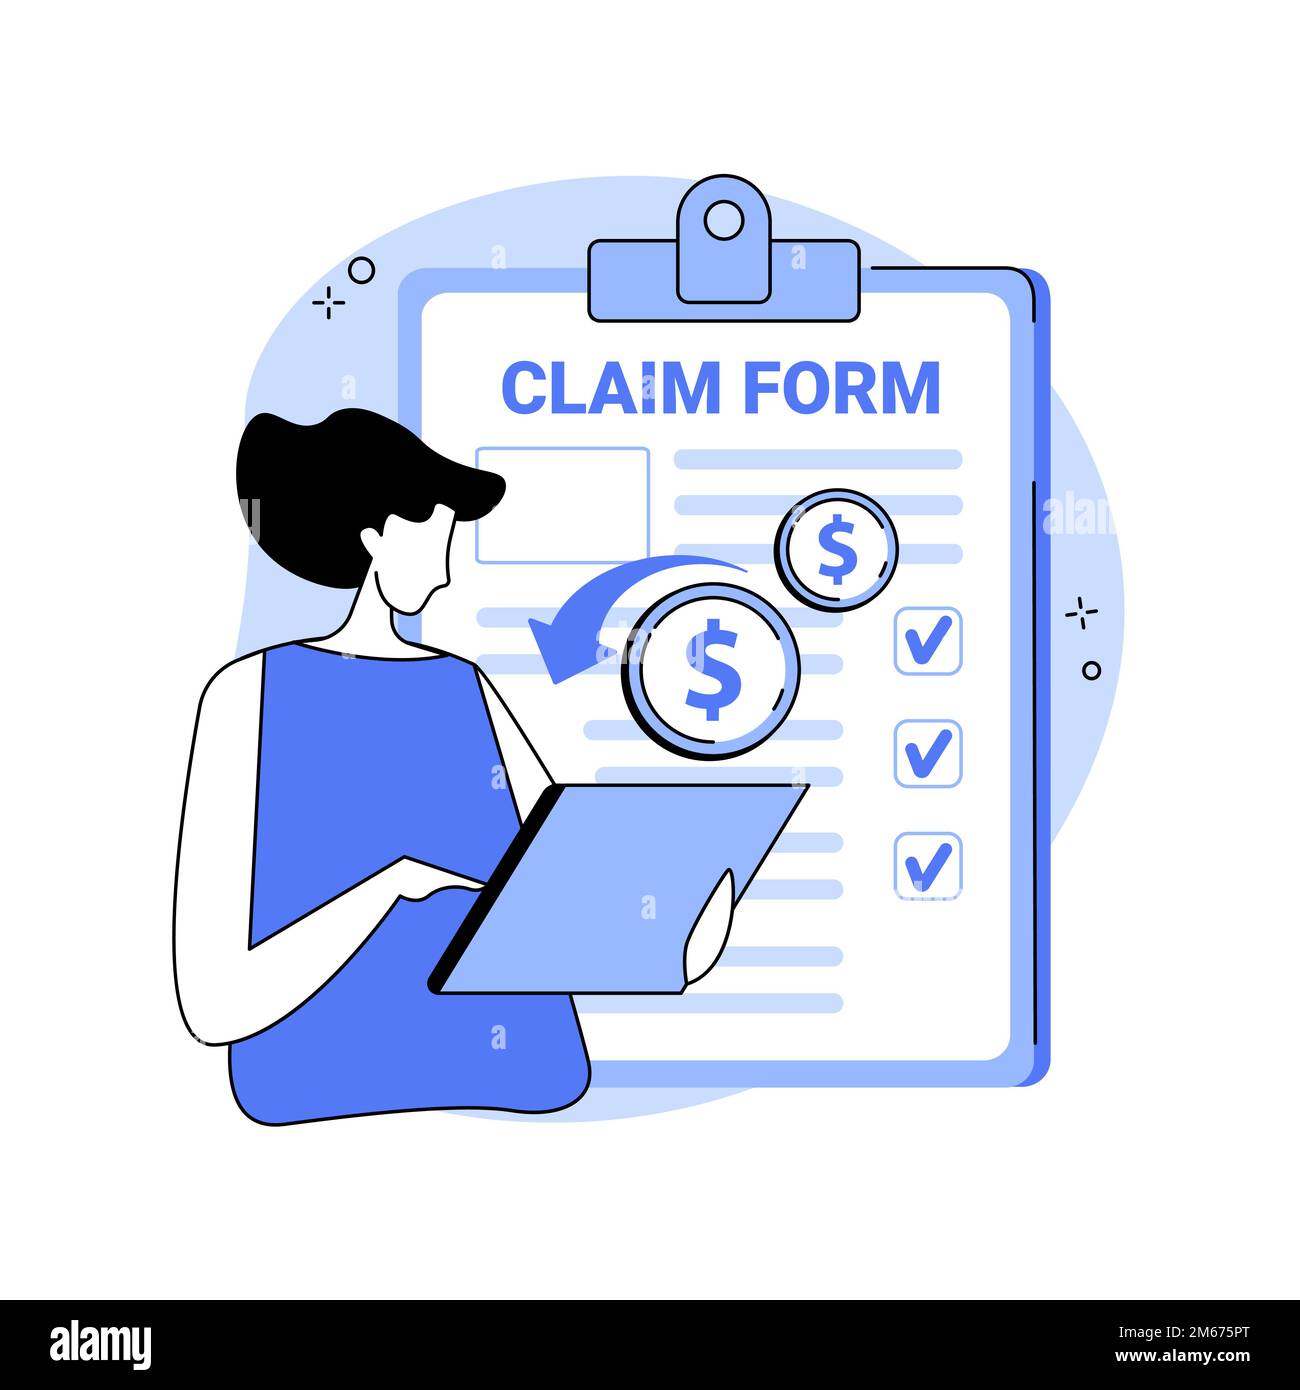 Claim your documents abstract concept vector illustration. Deductions, tax credits and expenses, job earnings, financial report, money refund, online Stock Vector